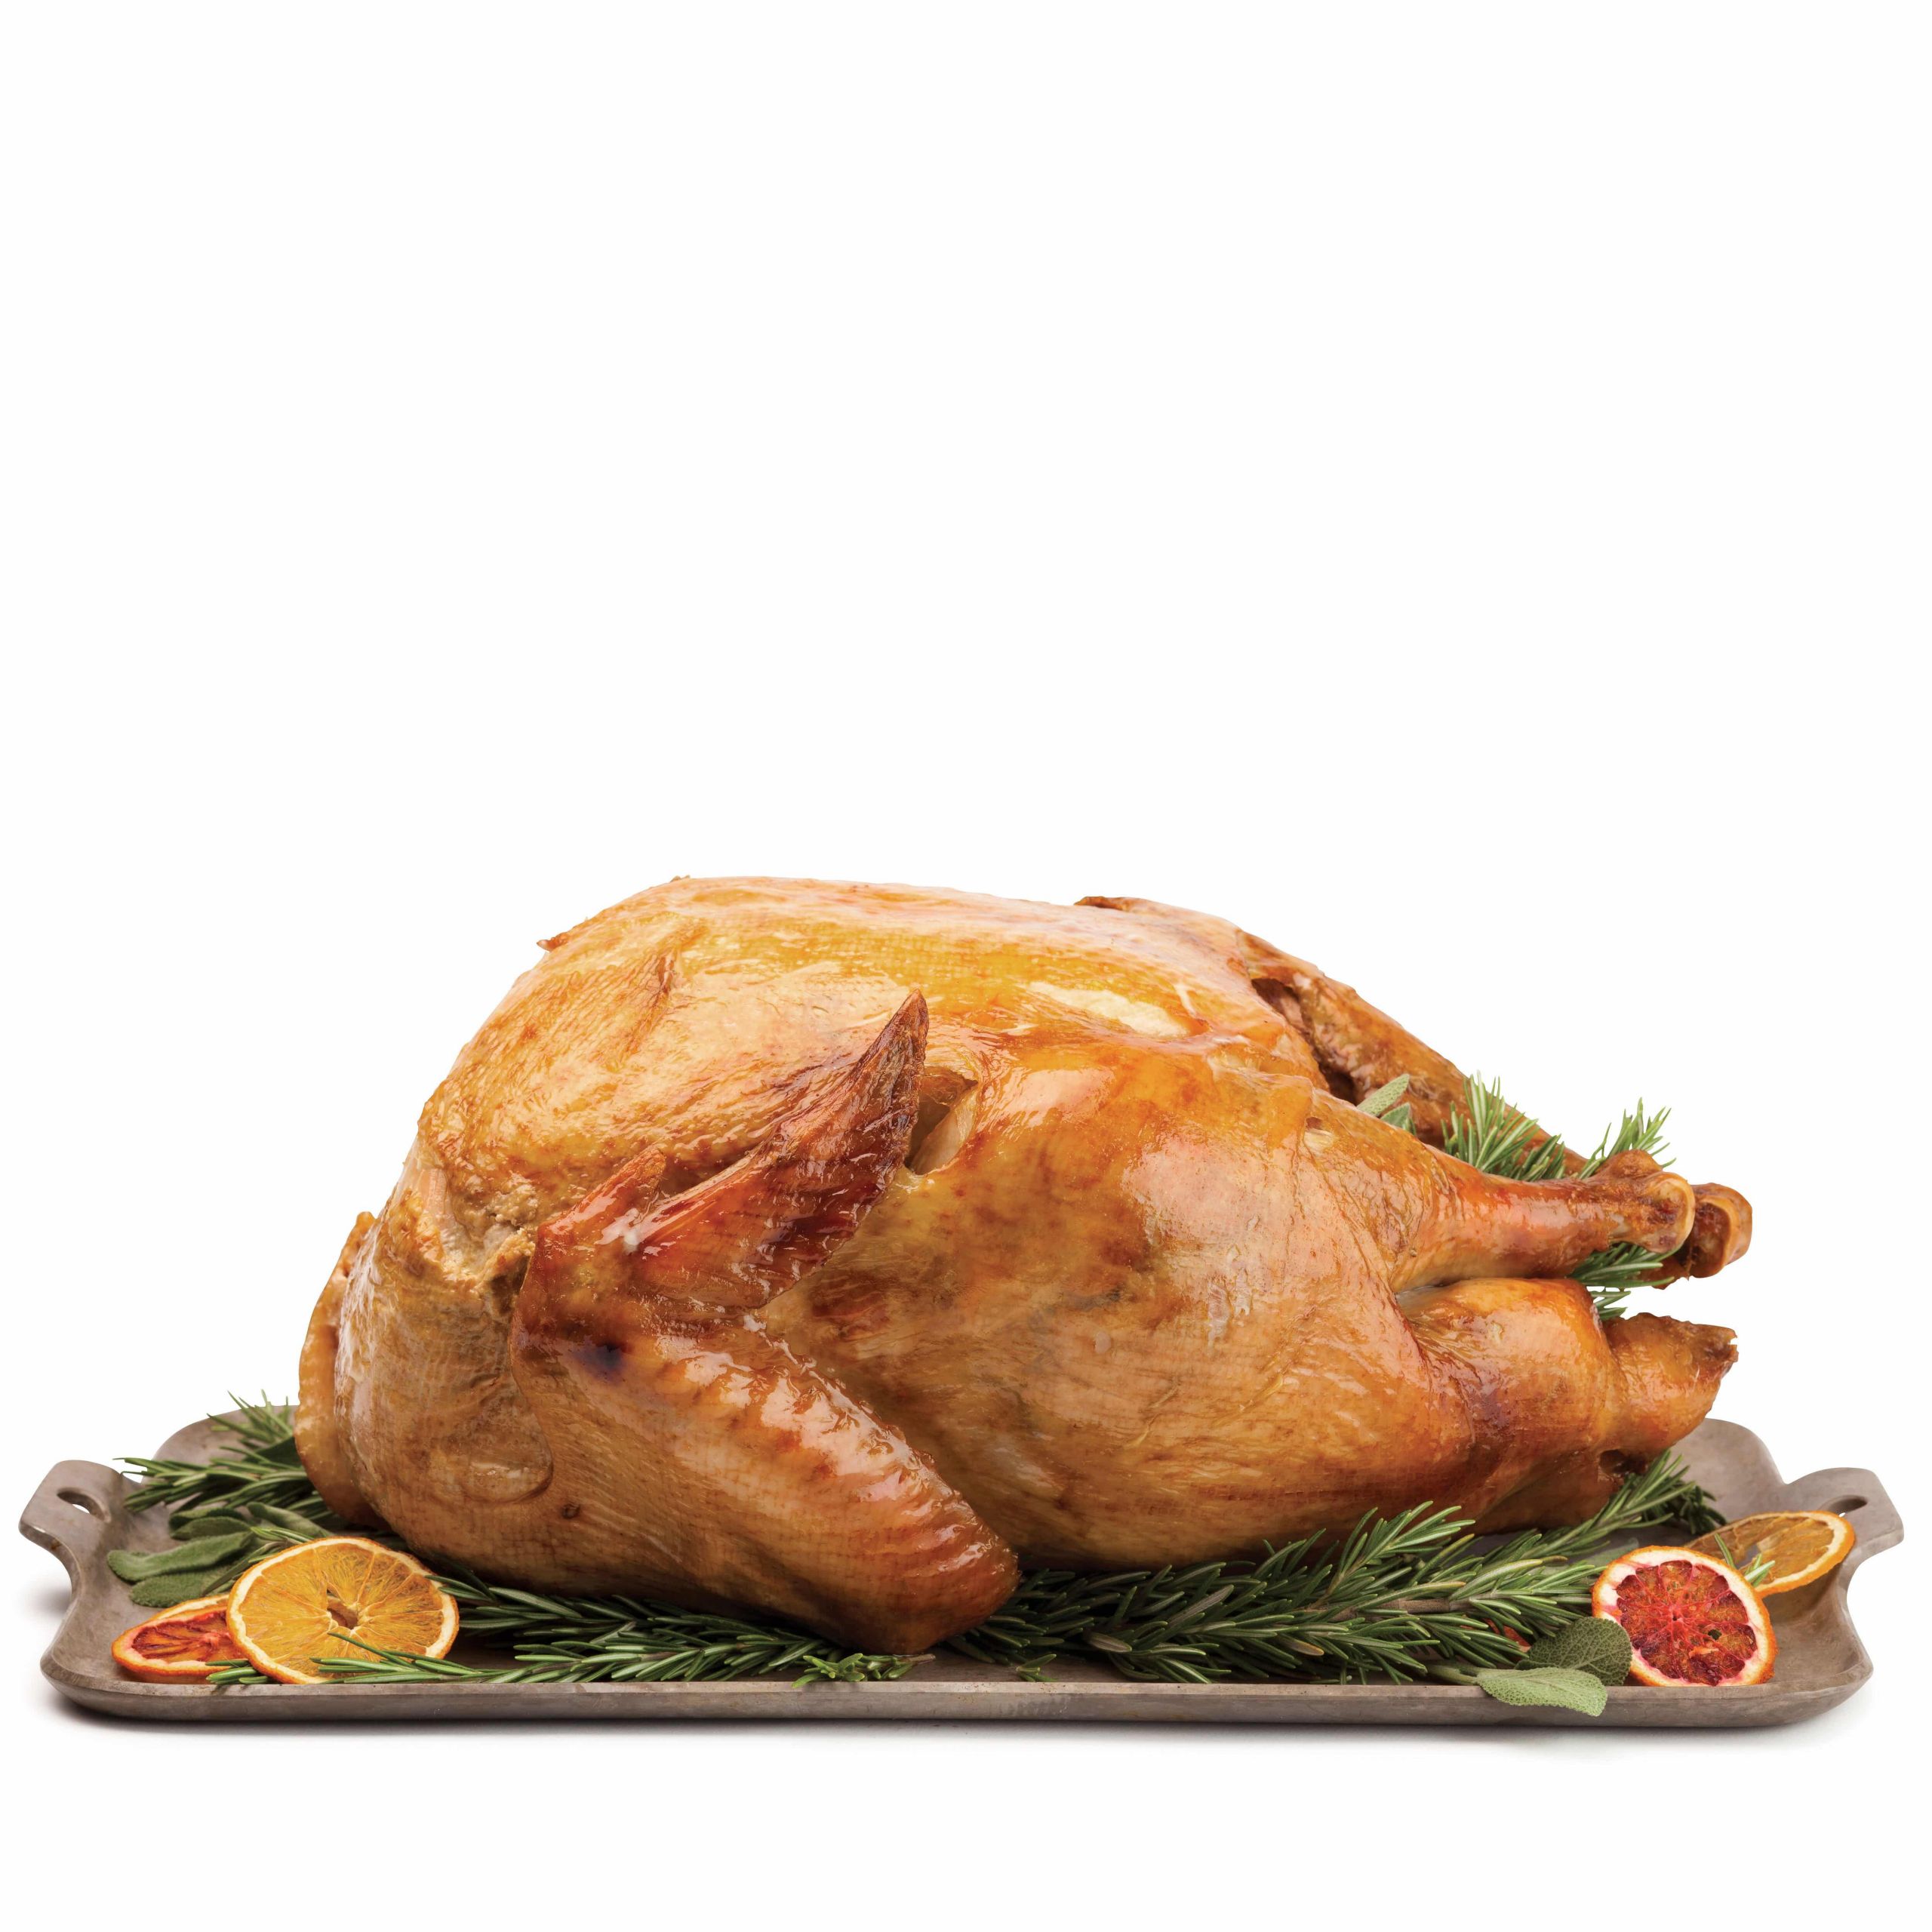 Buy A Cooked Turkey For Thanksgiving
 Cheatsgiving How To Order Thanksgiving Turkey